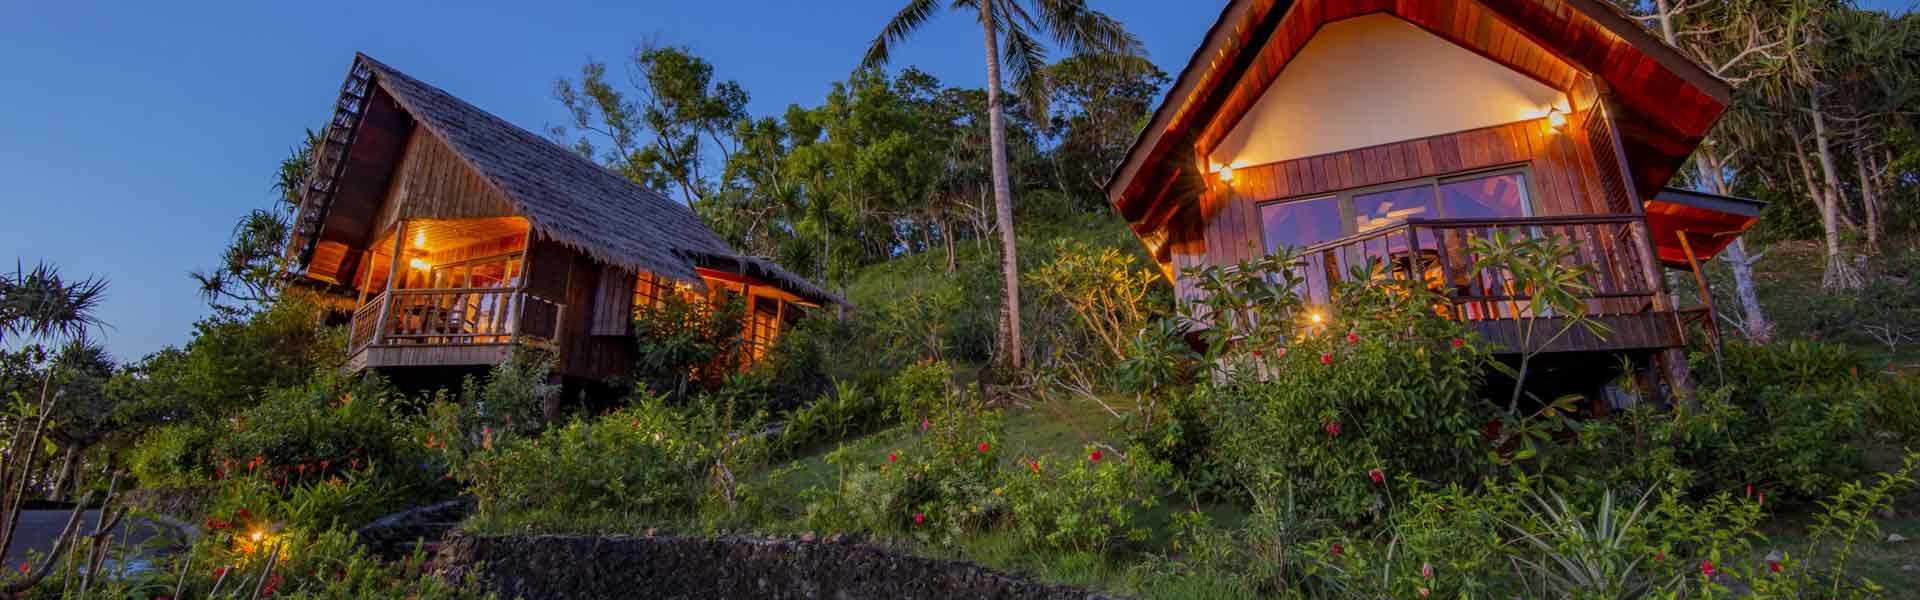 Island Escapes: 5 Nights of Tranquility in Micronesia w/ Transfers